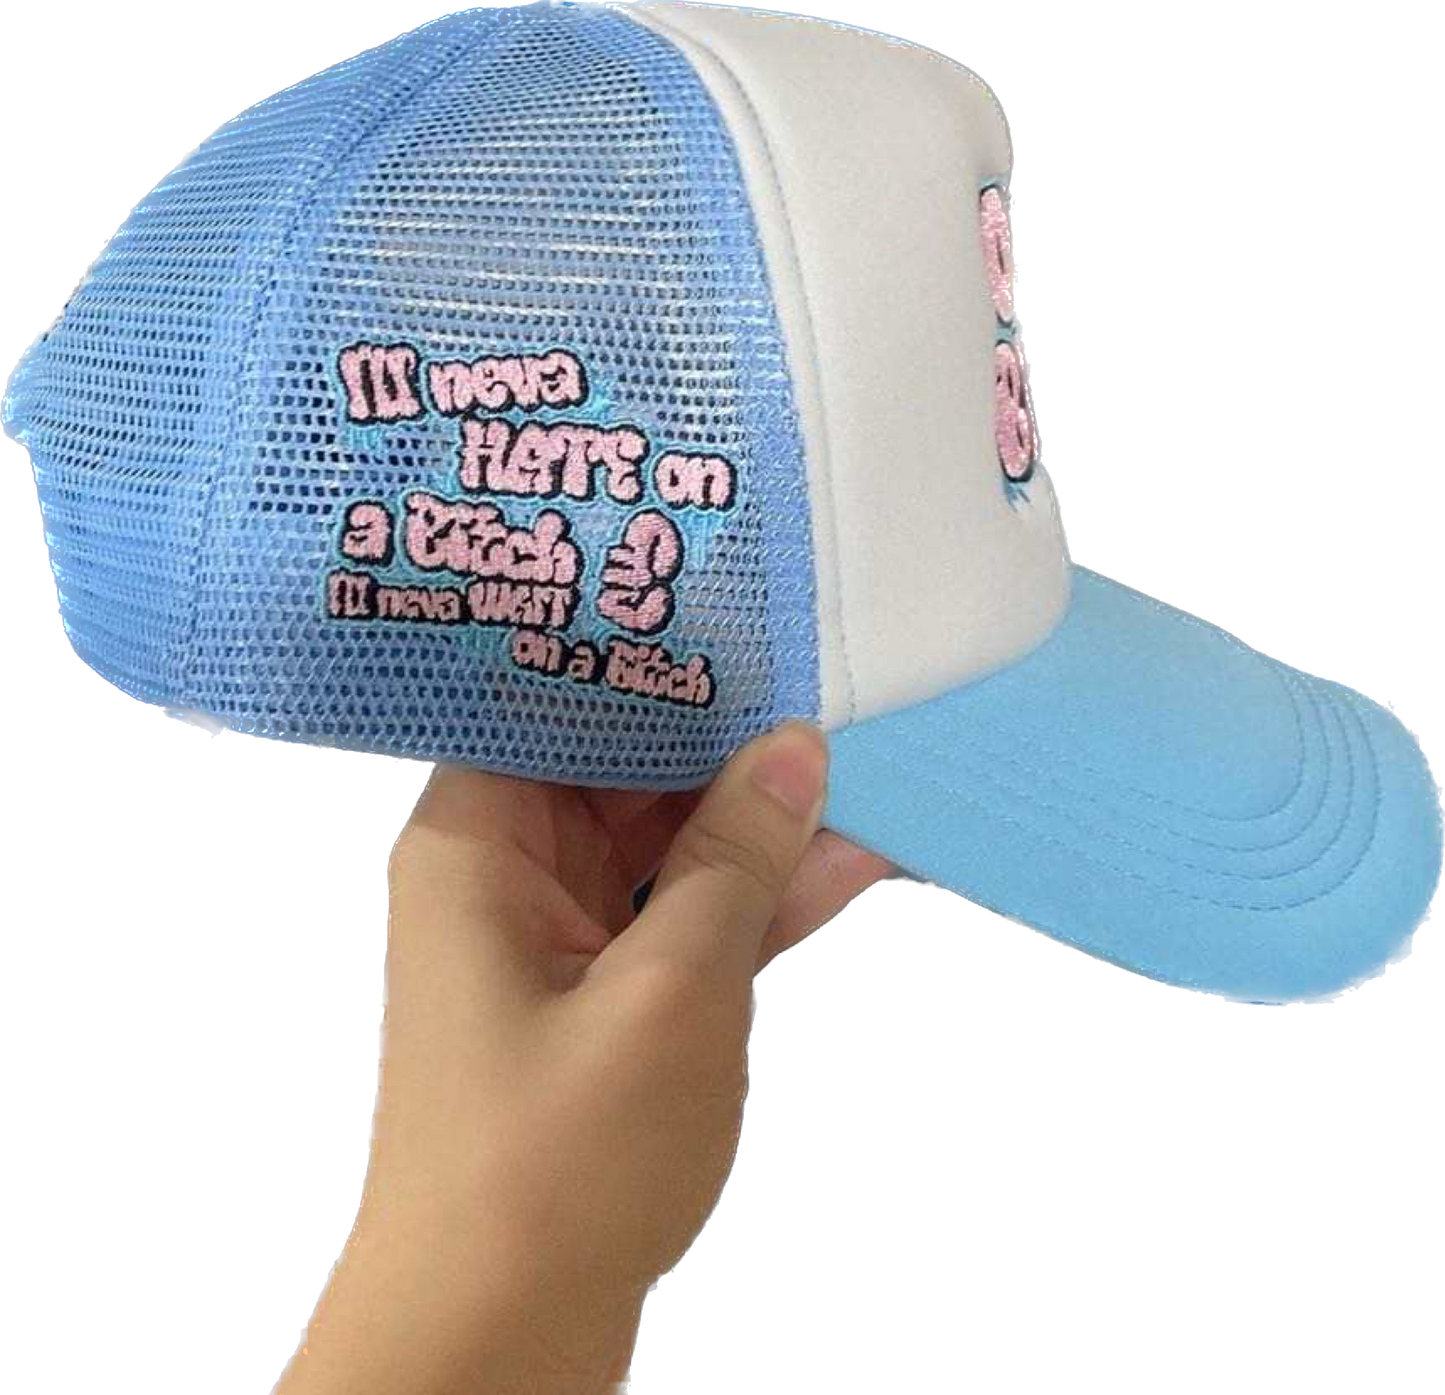 On a Bitch “Cotton Candy” Collection Trucker Cap 🍬🍭